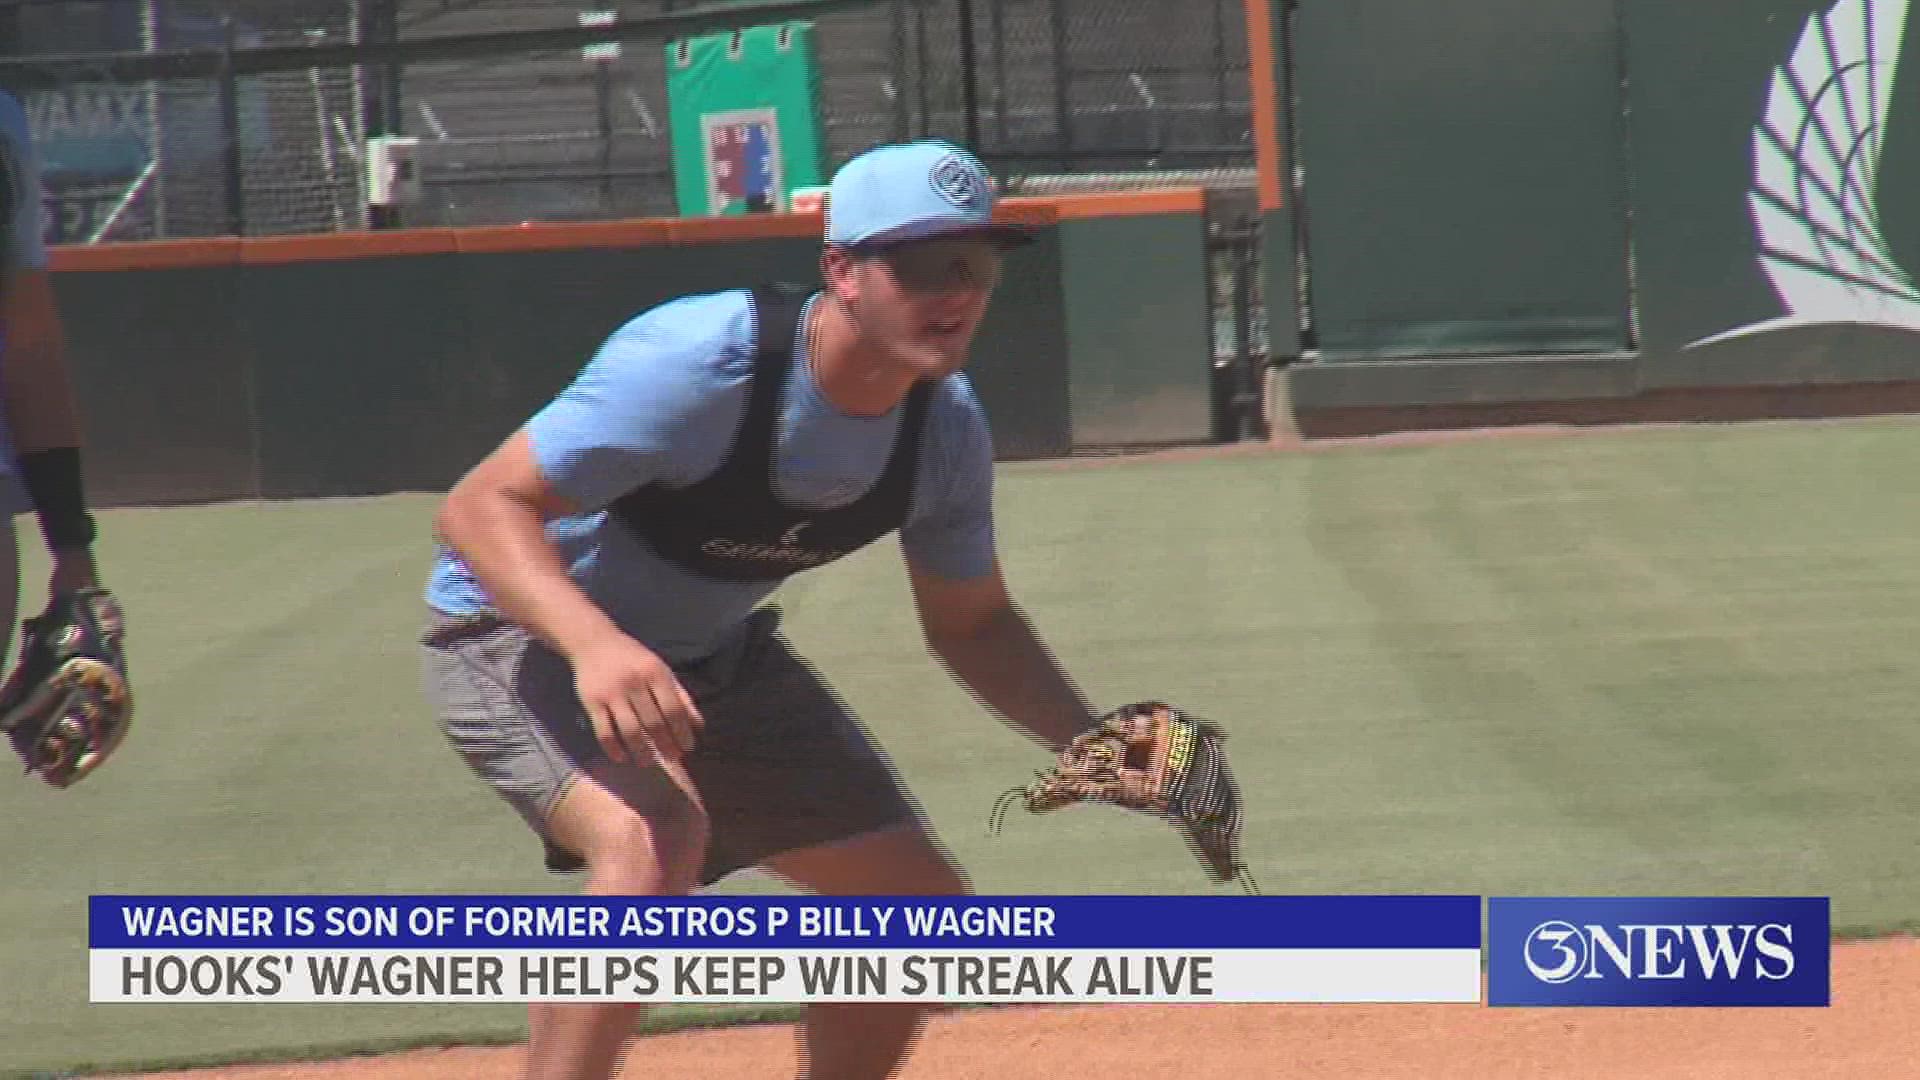 Will Wagner, the son of former Astros closer Billy Wagner, has already made his mark on Corpus Christi with a game-winning HR earlier in the week.